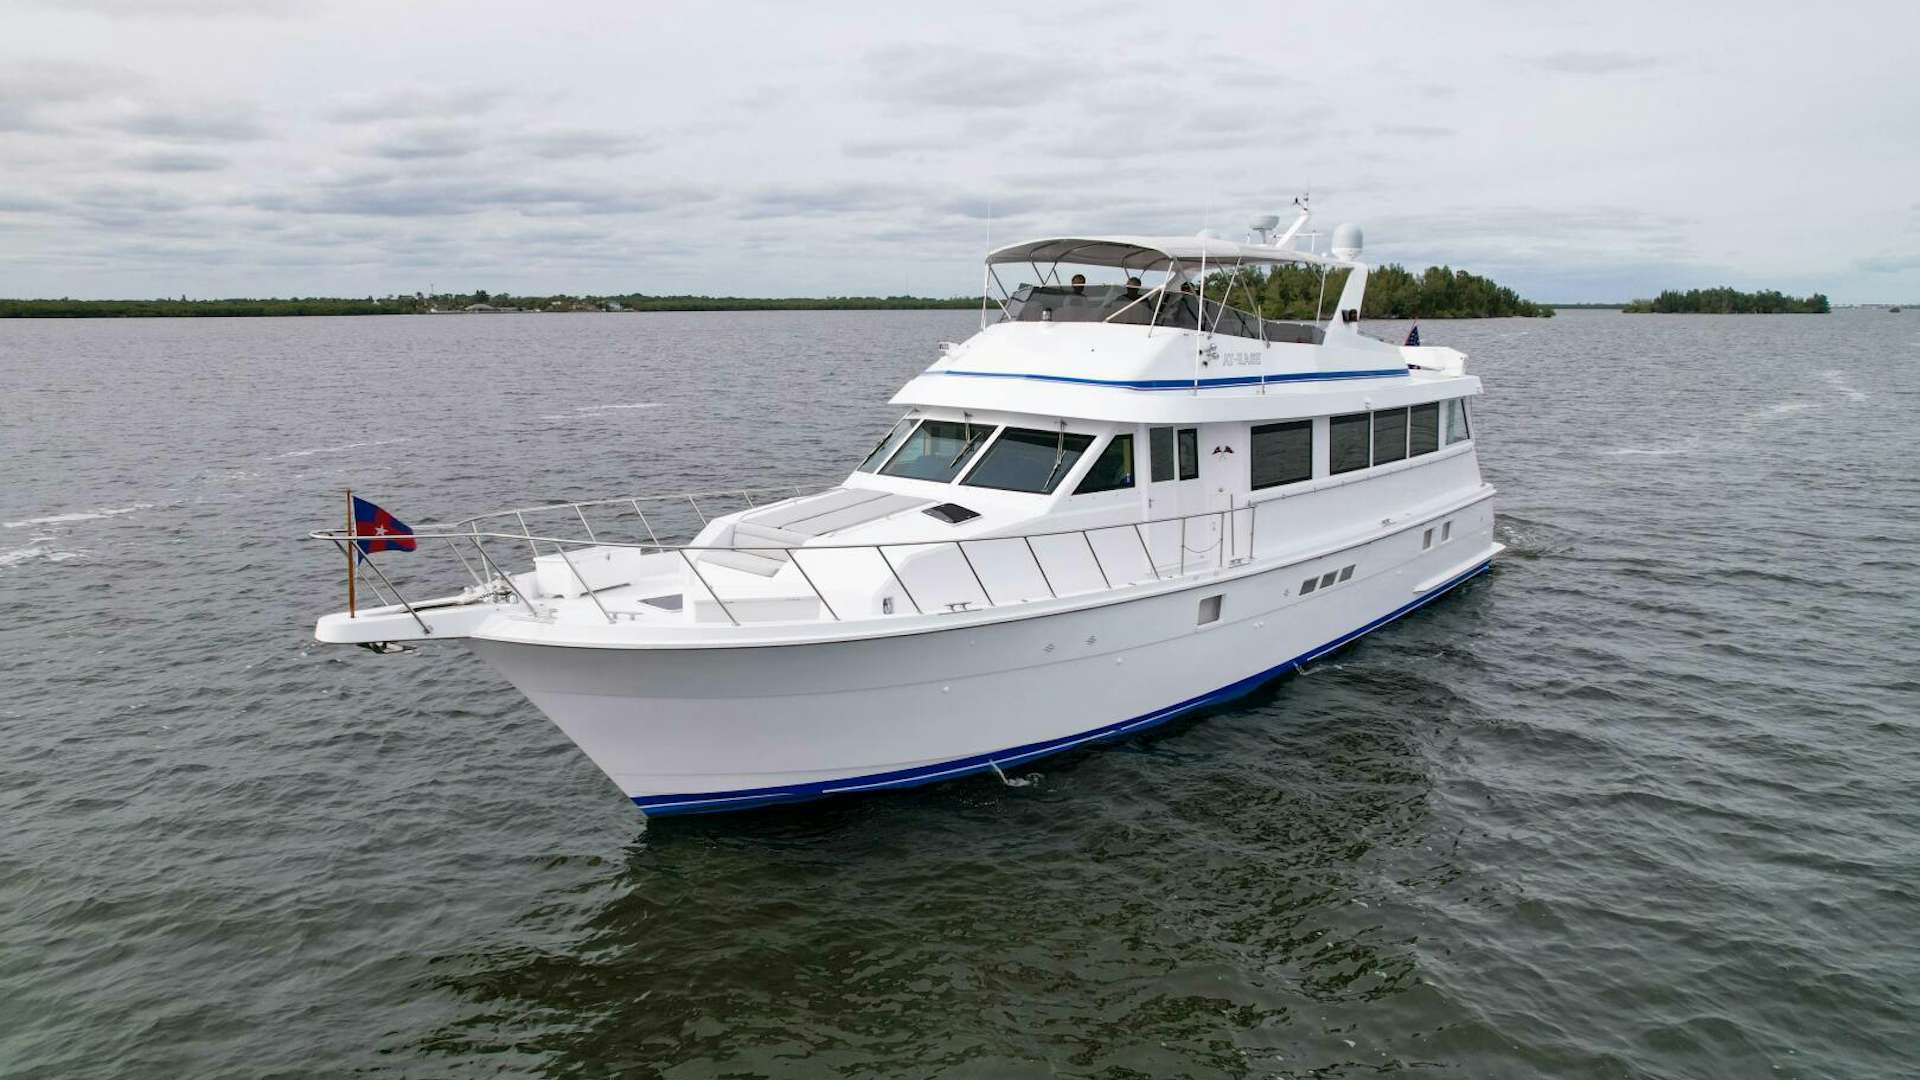 At ease
Yacht for Sale